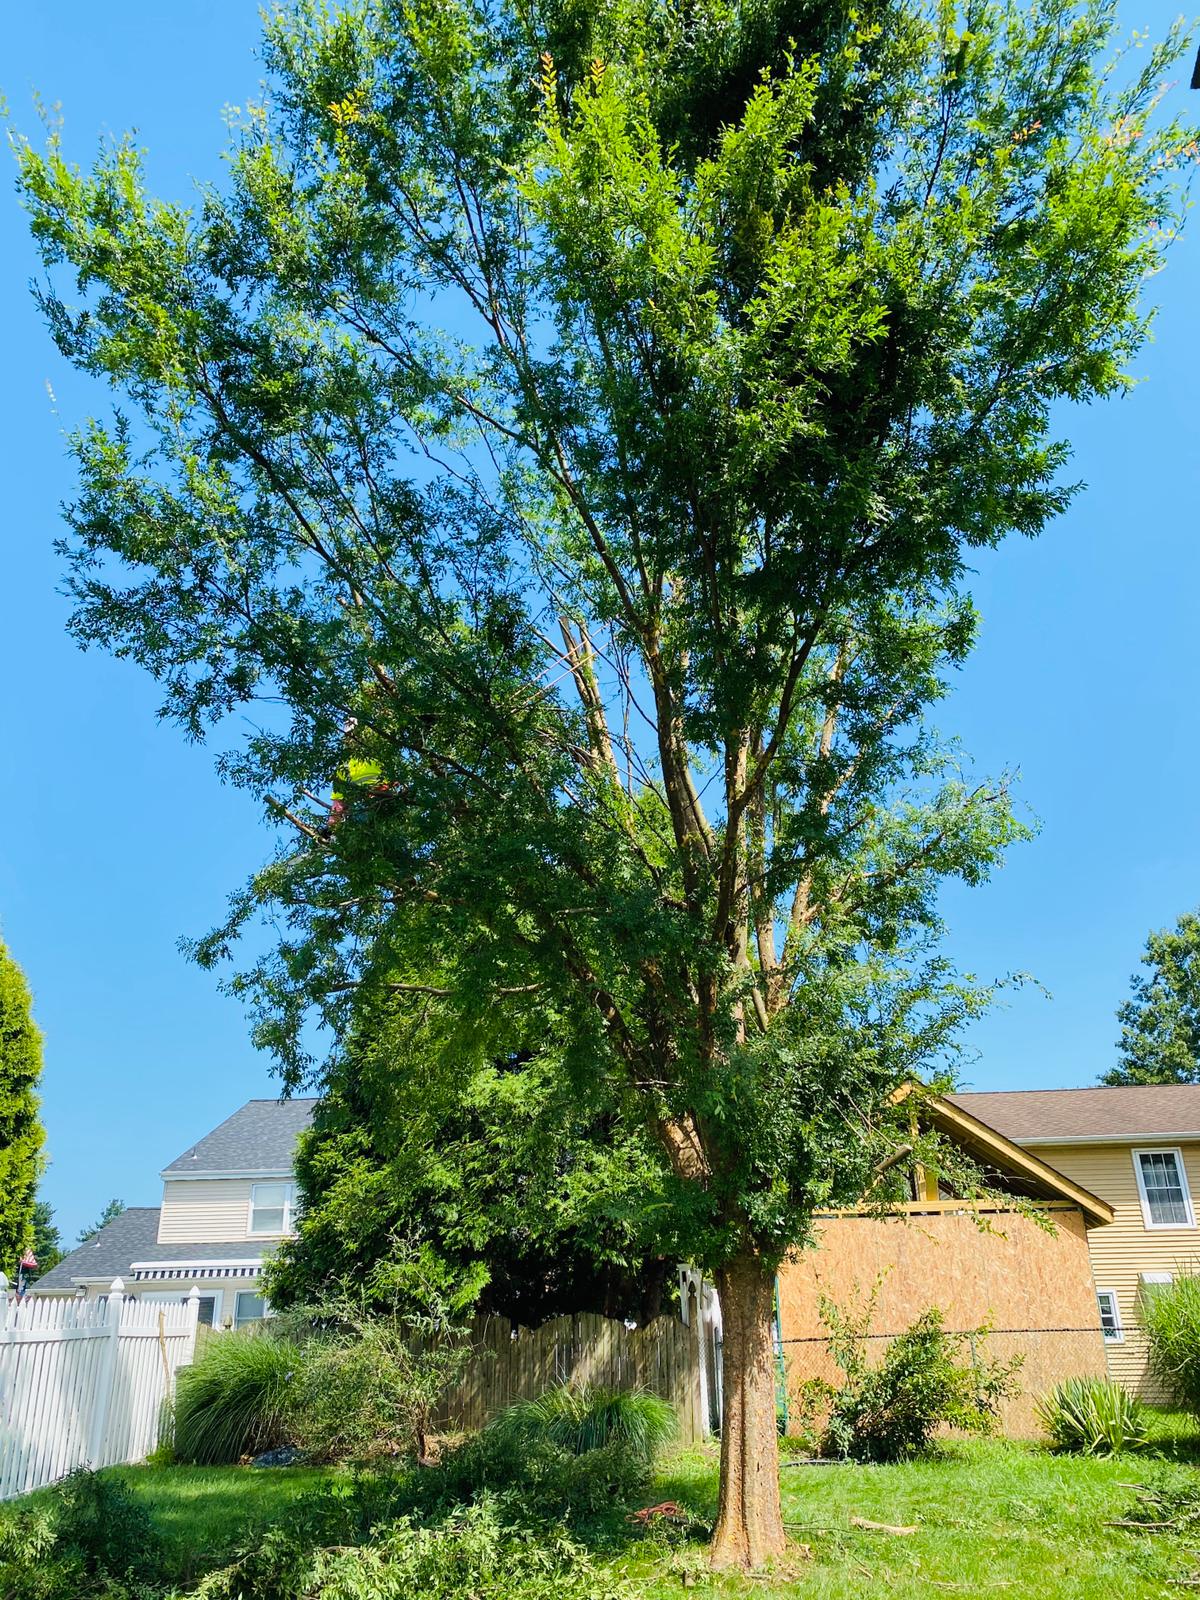 A.C. Tree Service LLC-91 Manor Dr Hagerstown, MD 21740-1-301-302-6467 (11)